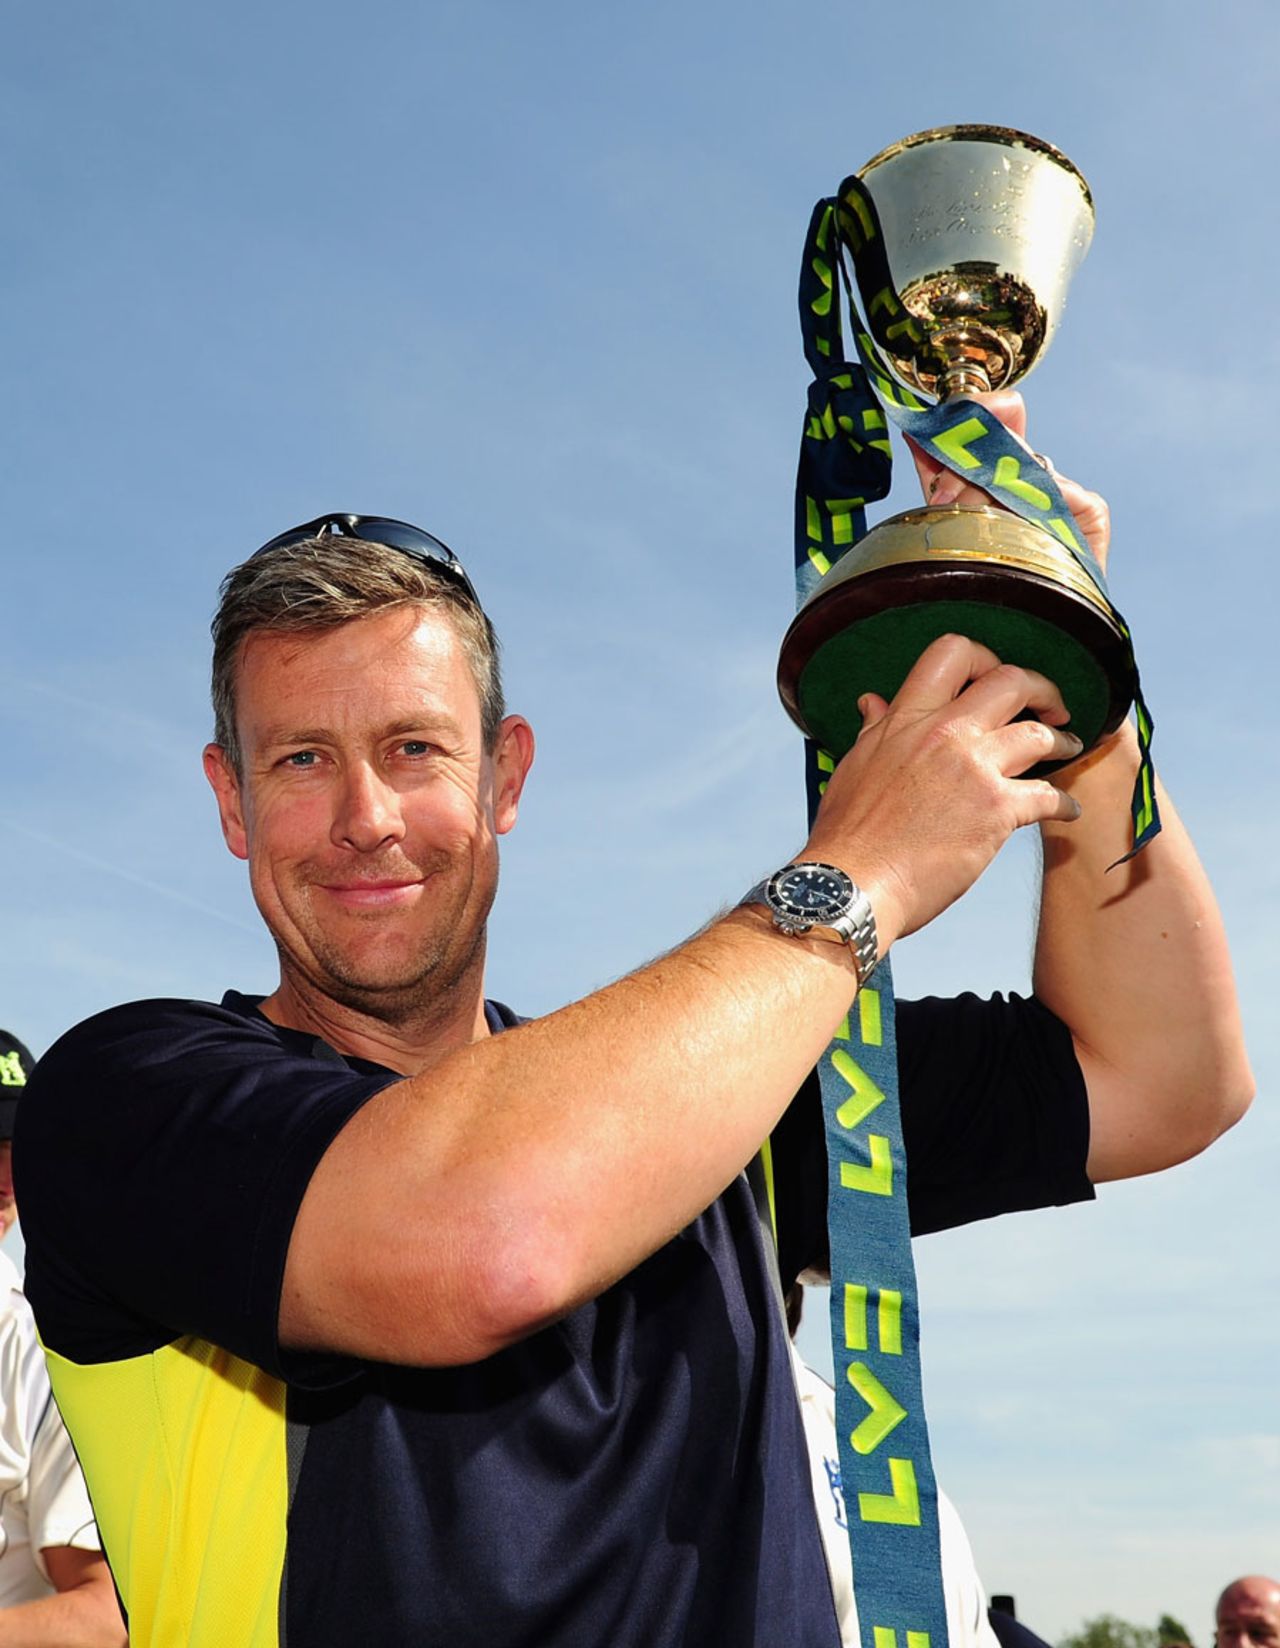 Ashley Giles holds the County Championship trophy aloft, Worcestershire v Warwickshire, County Championship, Division One, New Road, 3rd day, September 6, 2012